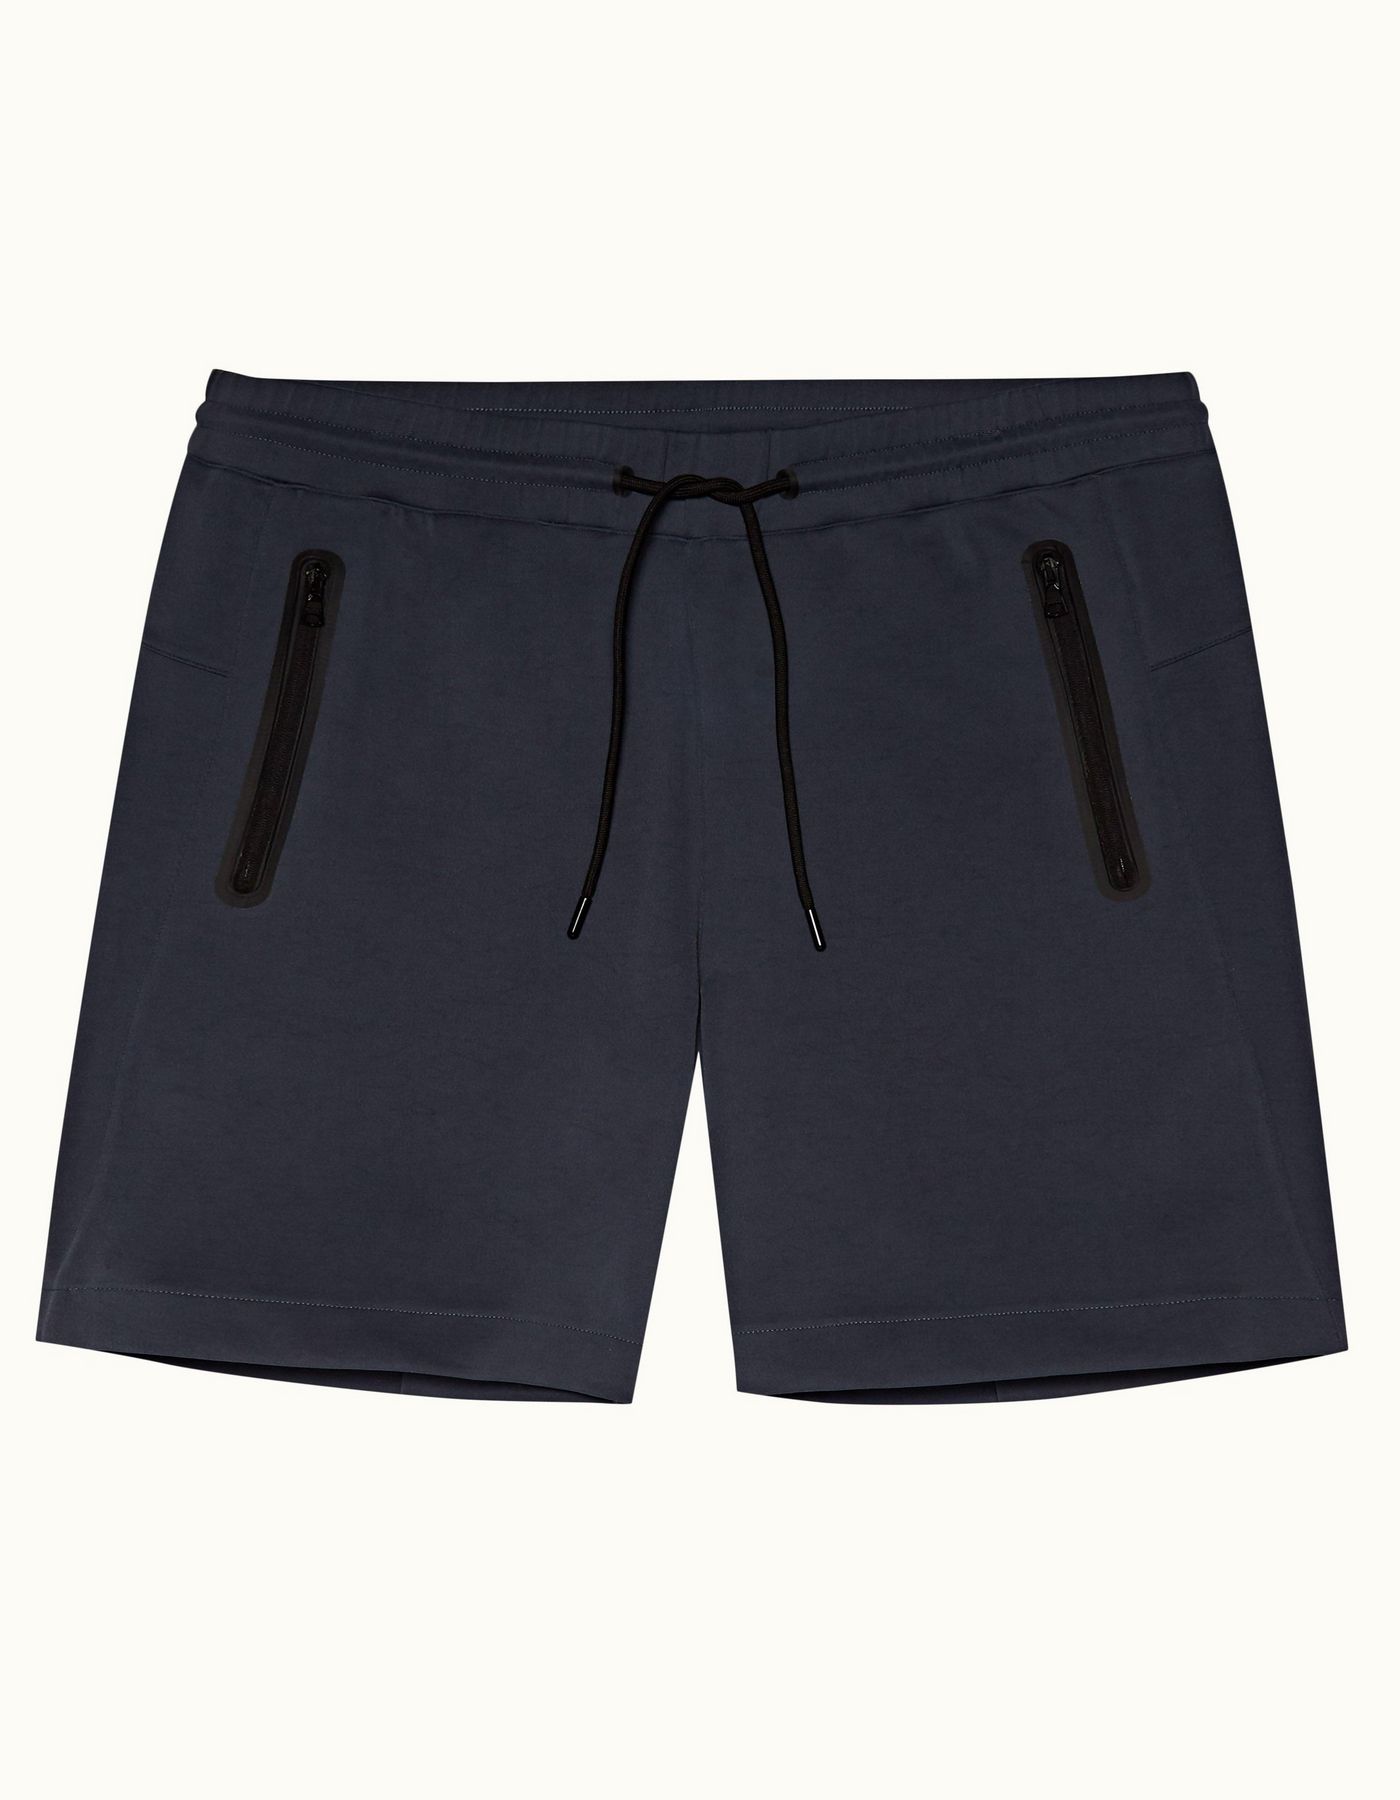 Blundell Technical - Mens Shark Grey Tailored Fit Sweat Shorts